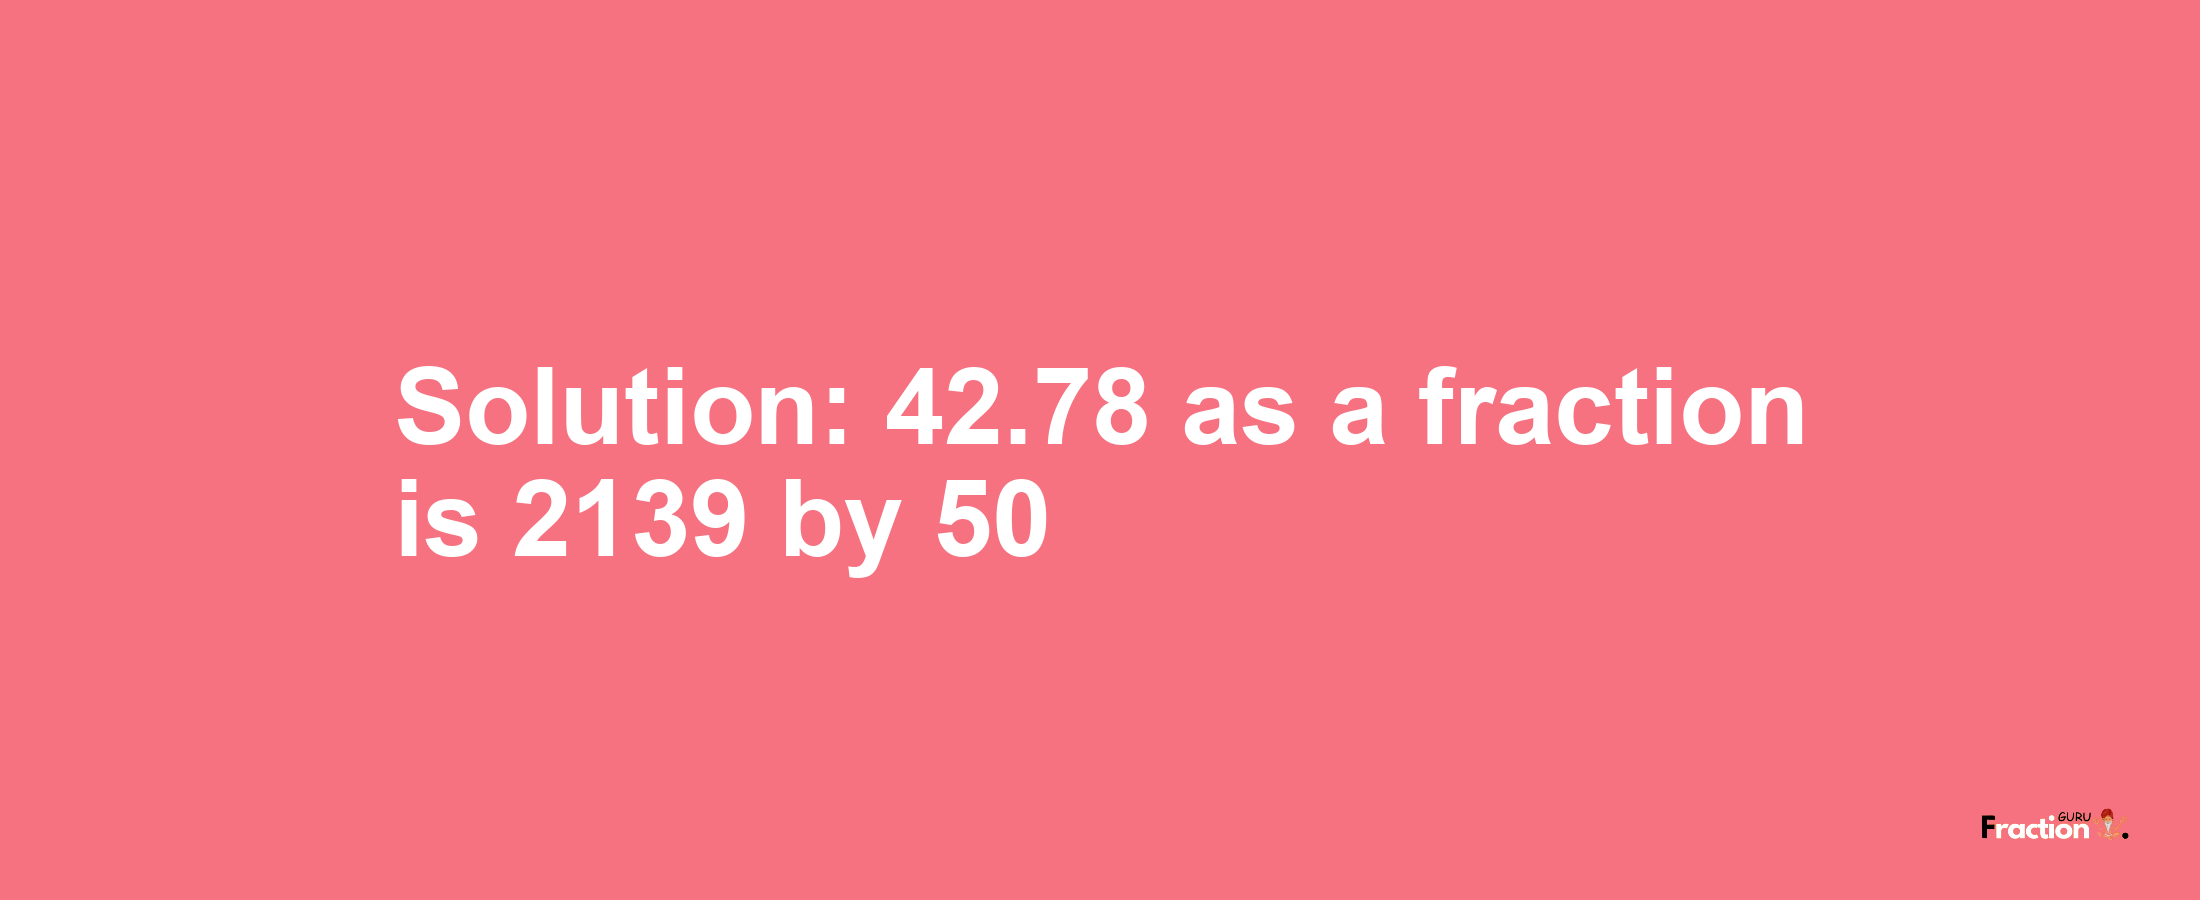 Solution:42.78 as a fraction is 2139/50